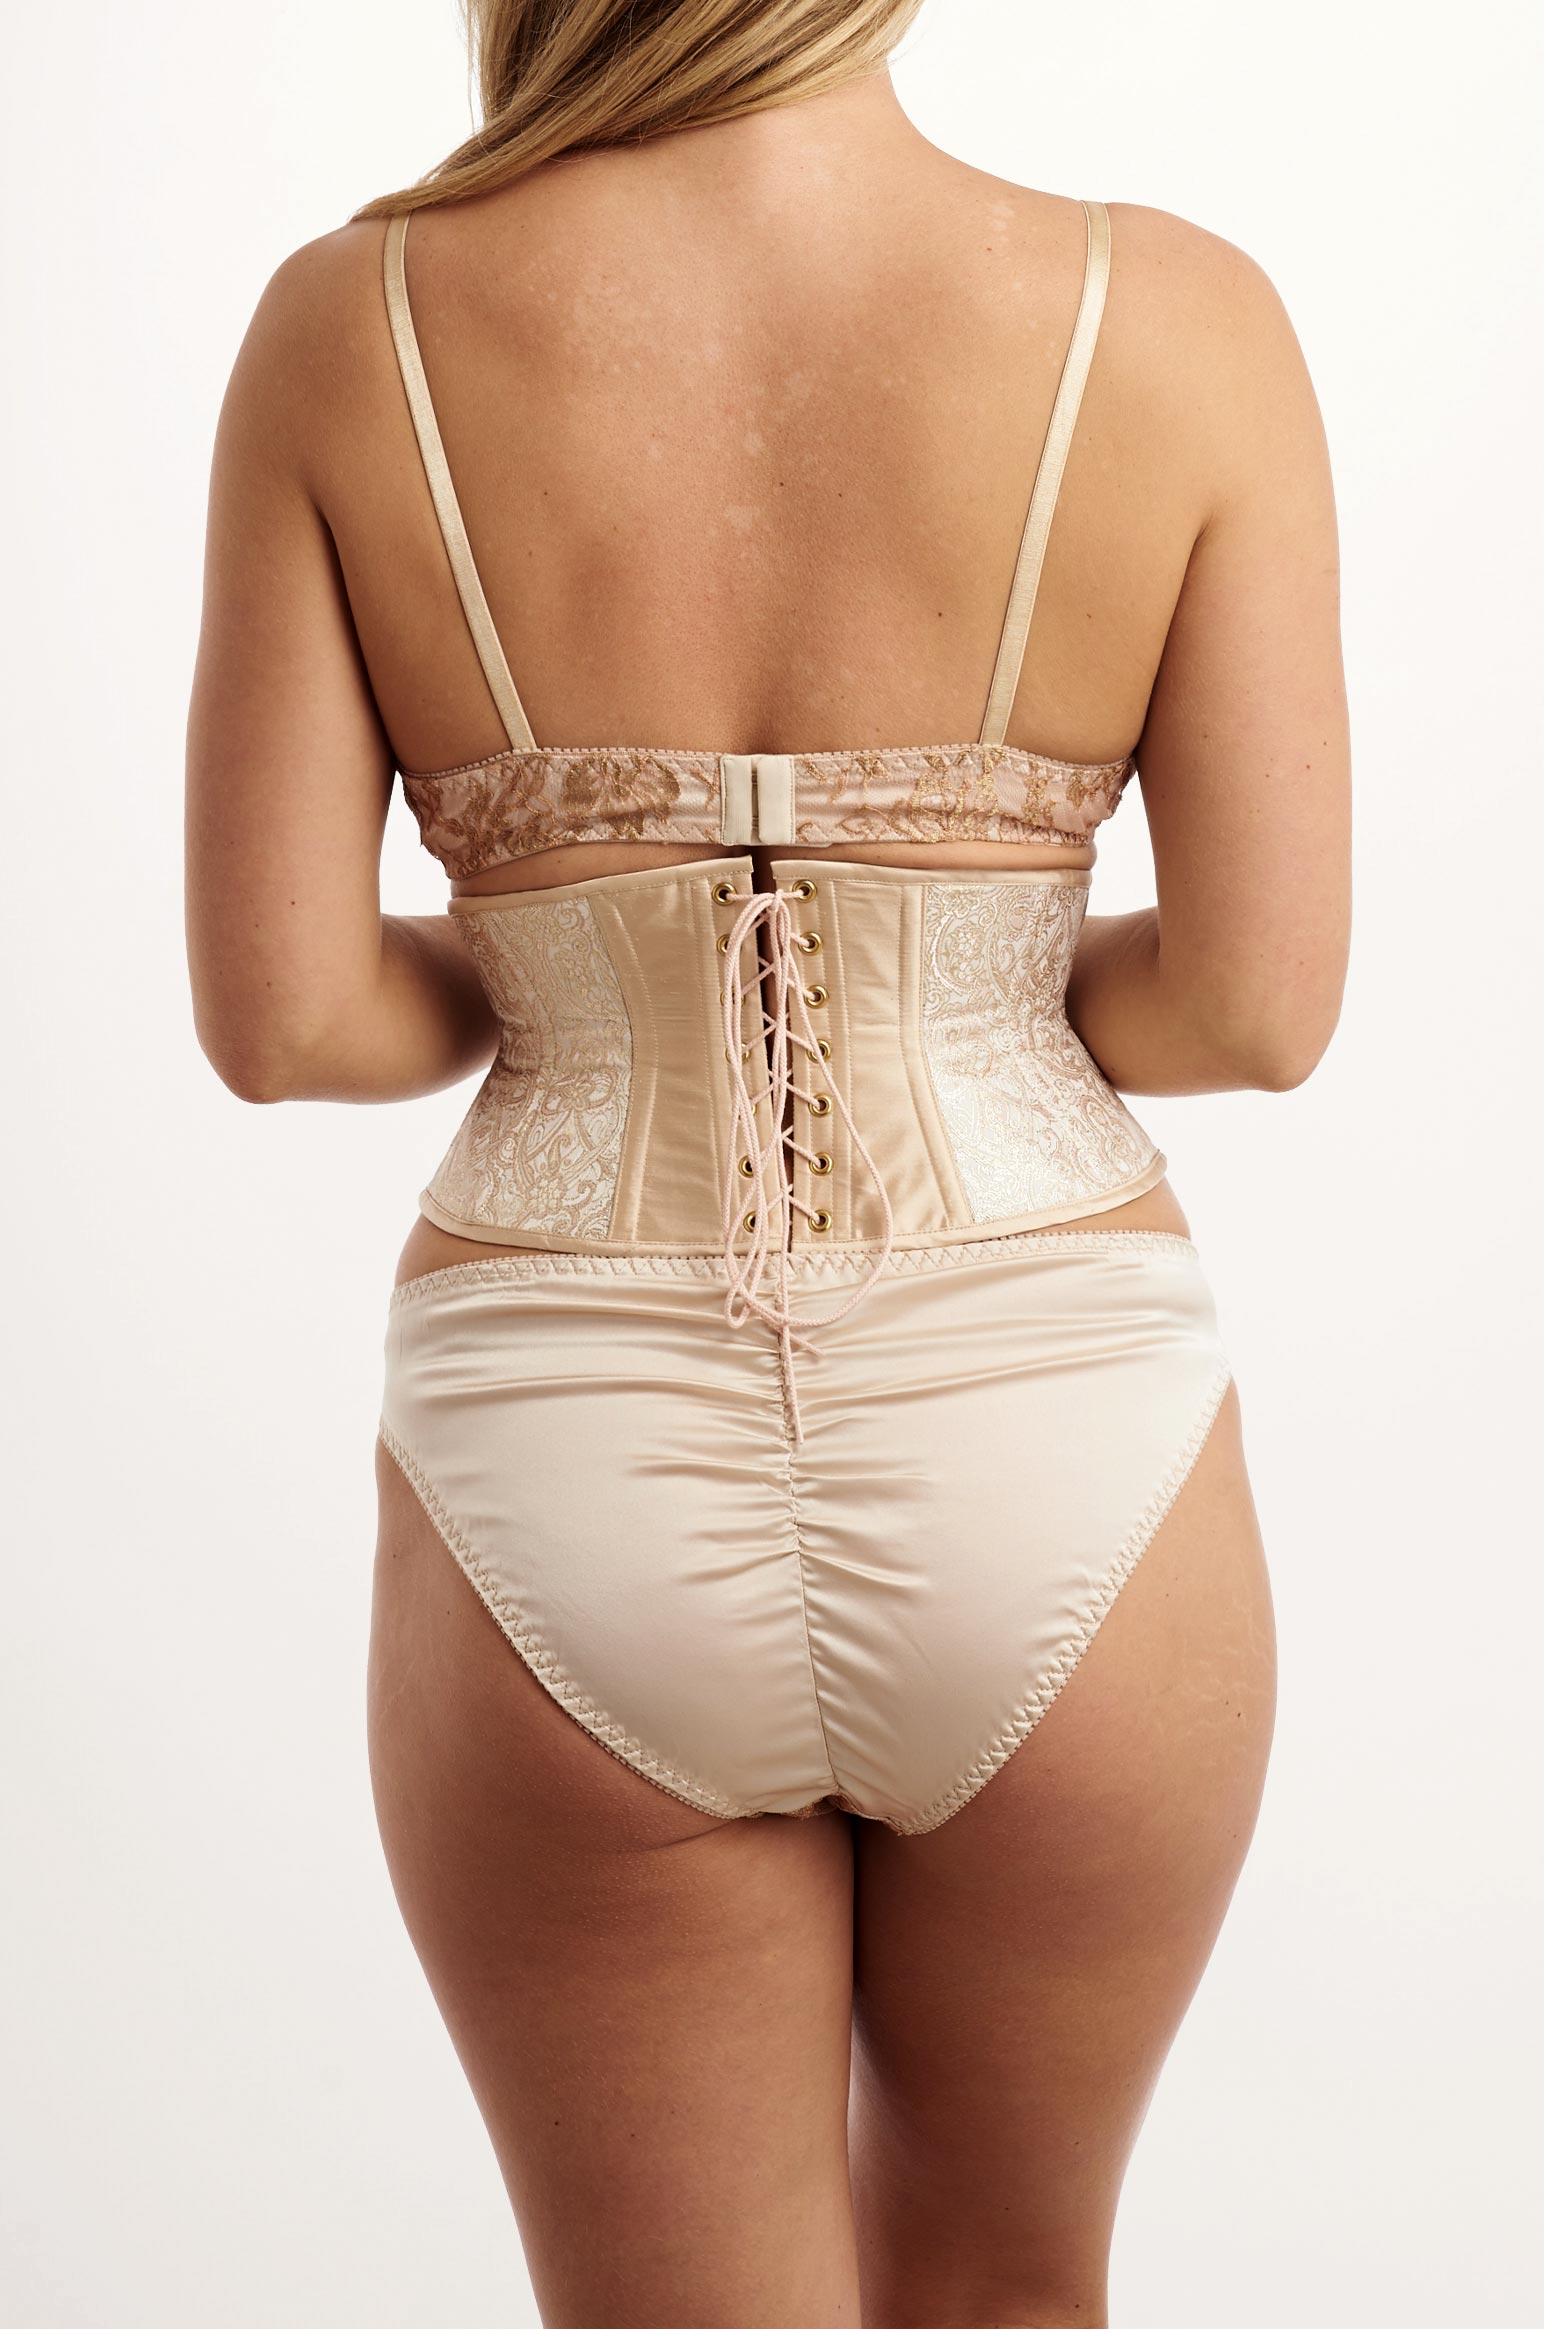 Blush pink silk corset with a satin luxury lingerie set